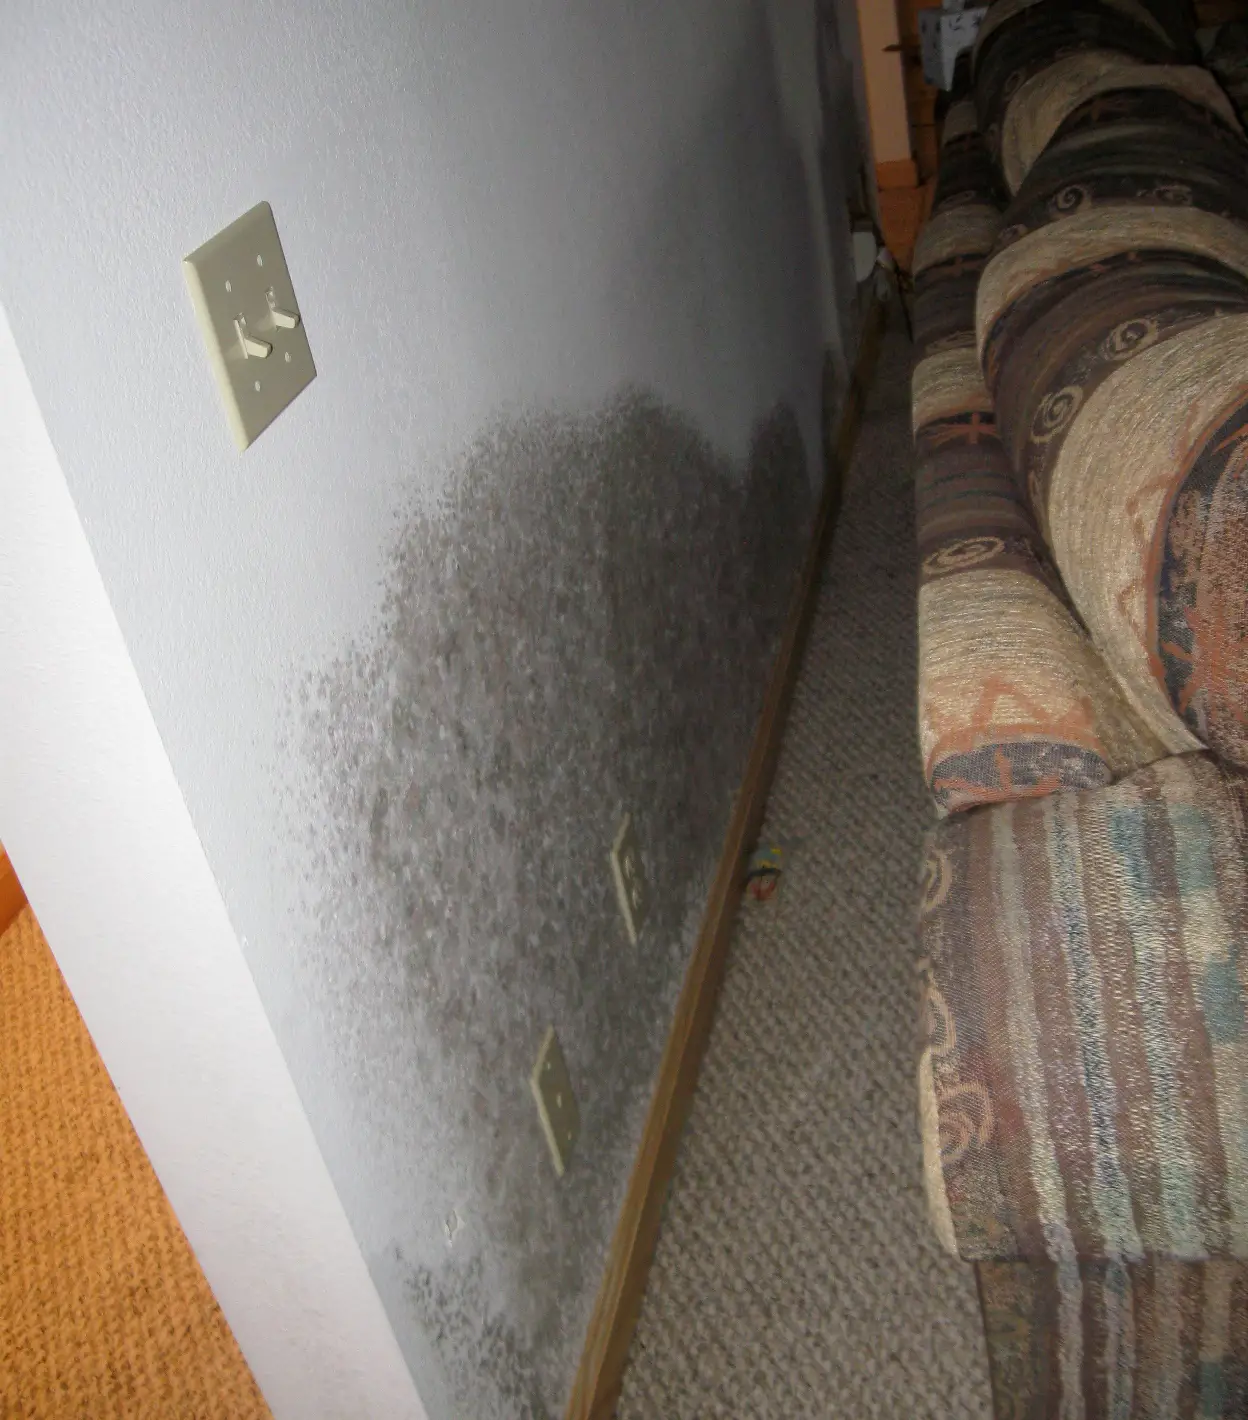 Damp, Moldy Homes Are Associated with Sinus Problems and Bronchitis